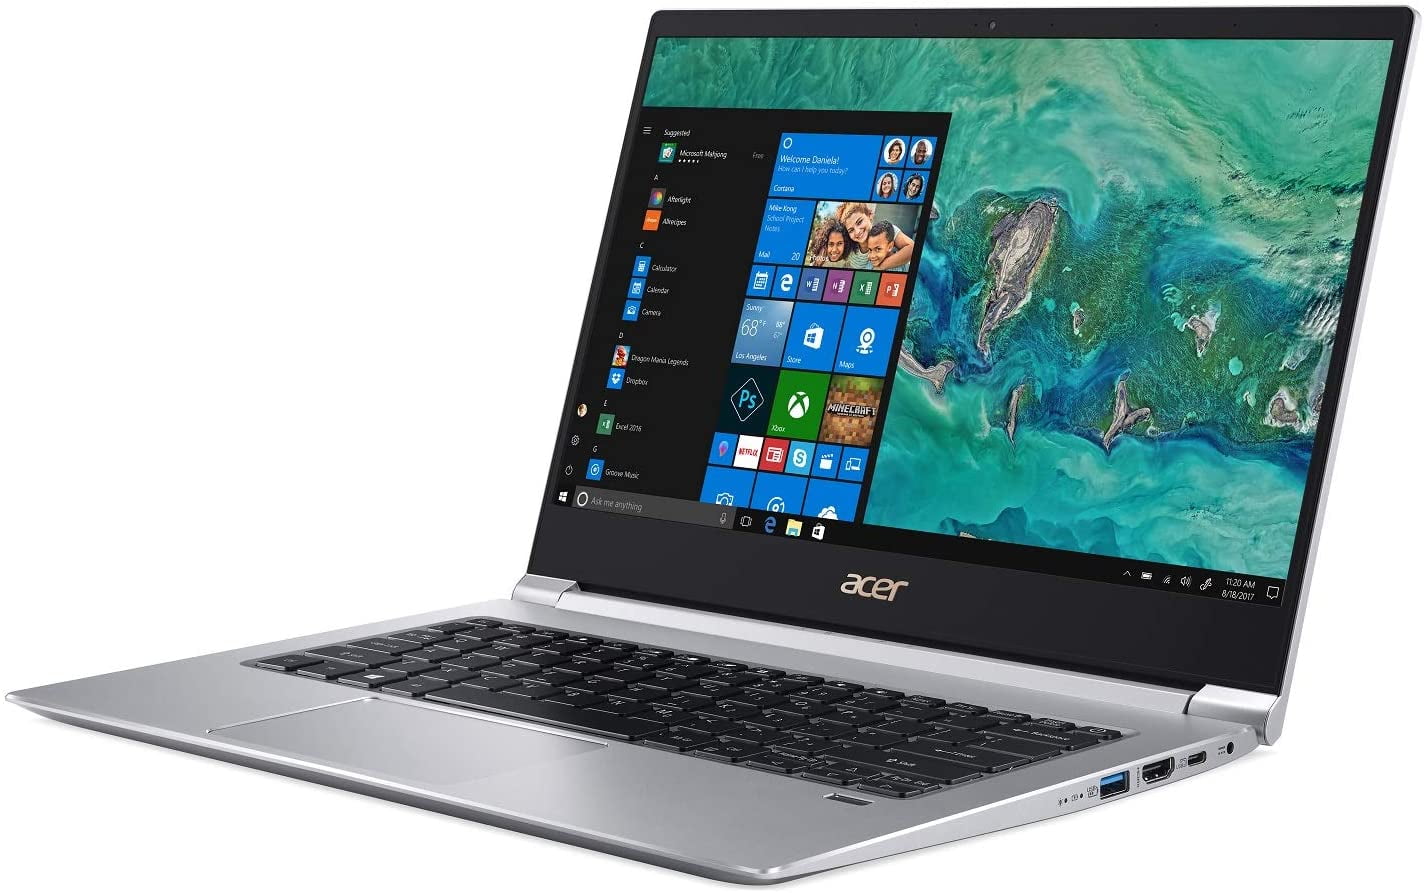 Acer Swift 3 (2017) review